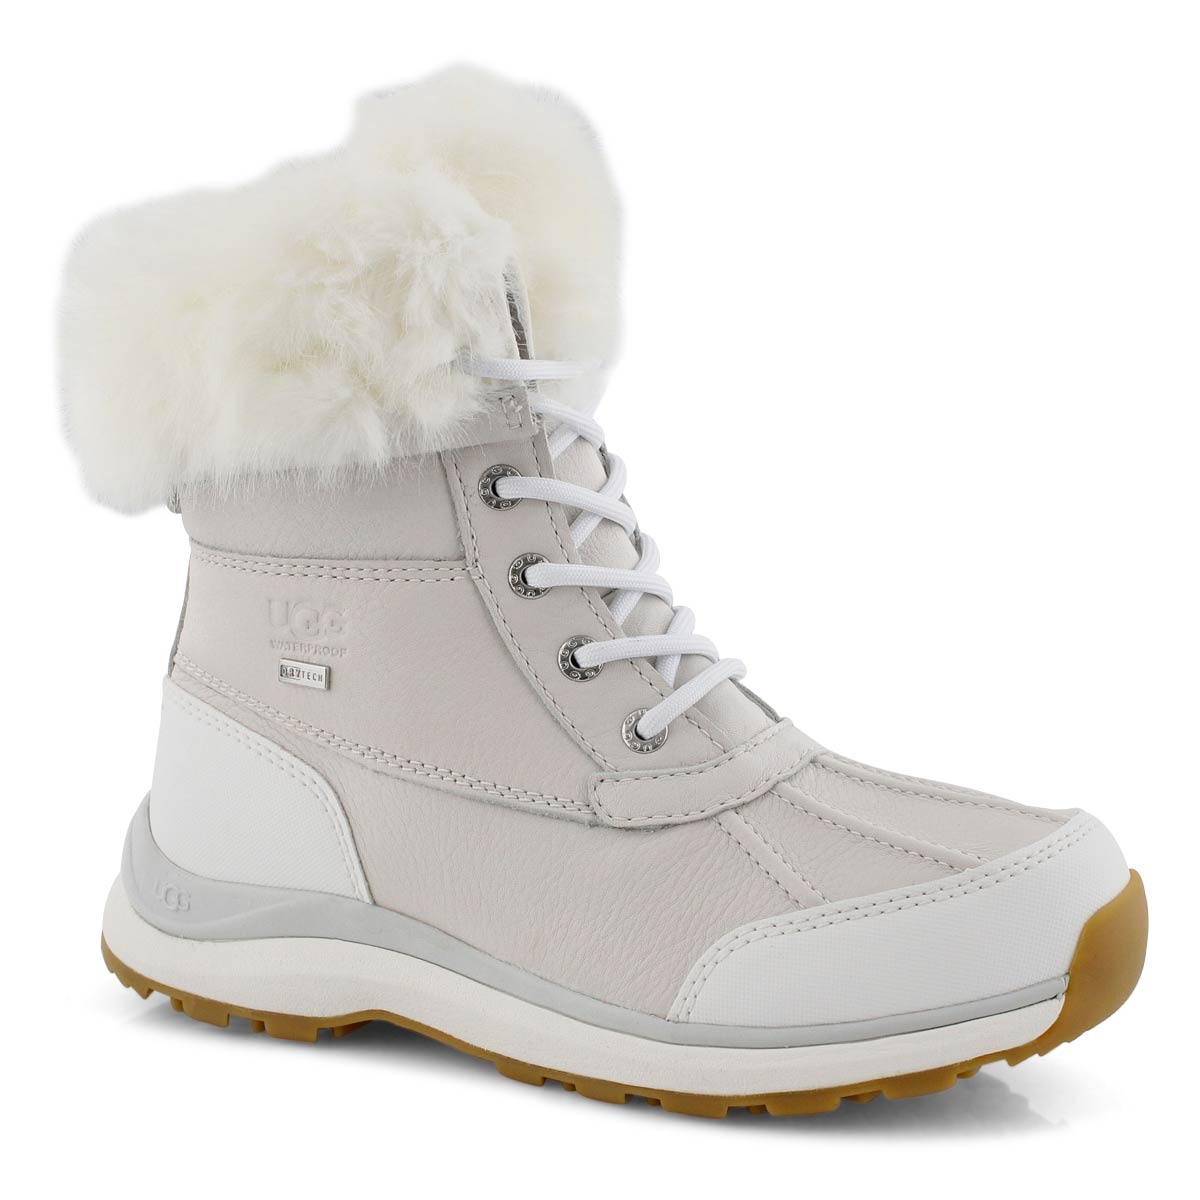 ugg winter boots white Cheaper Than 